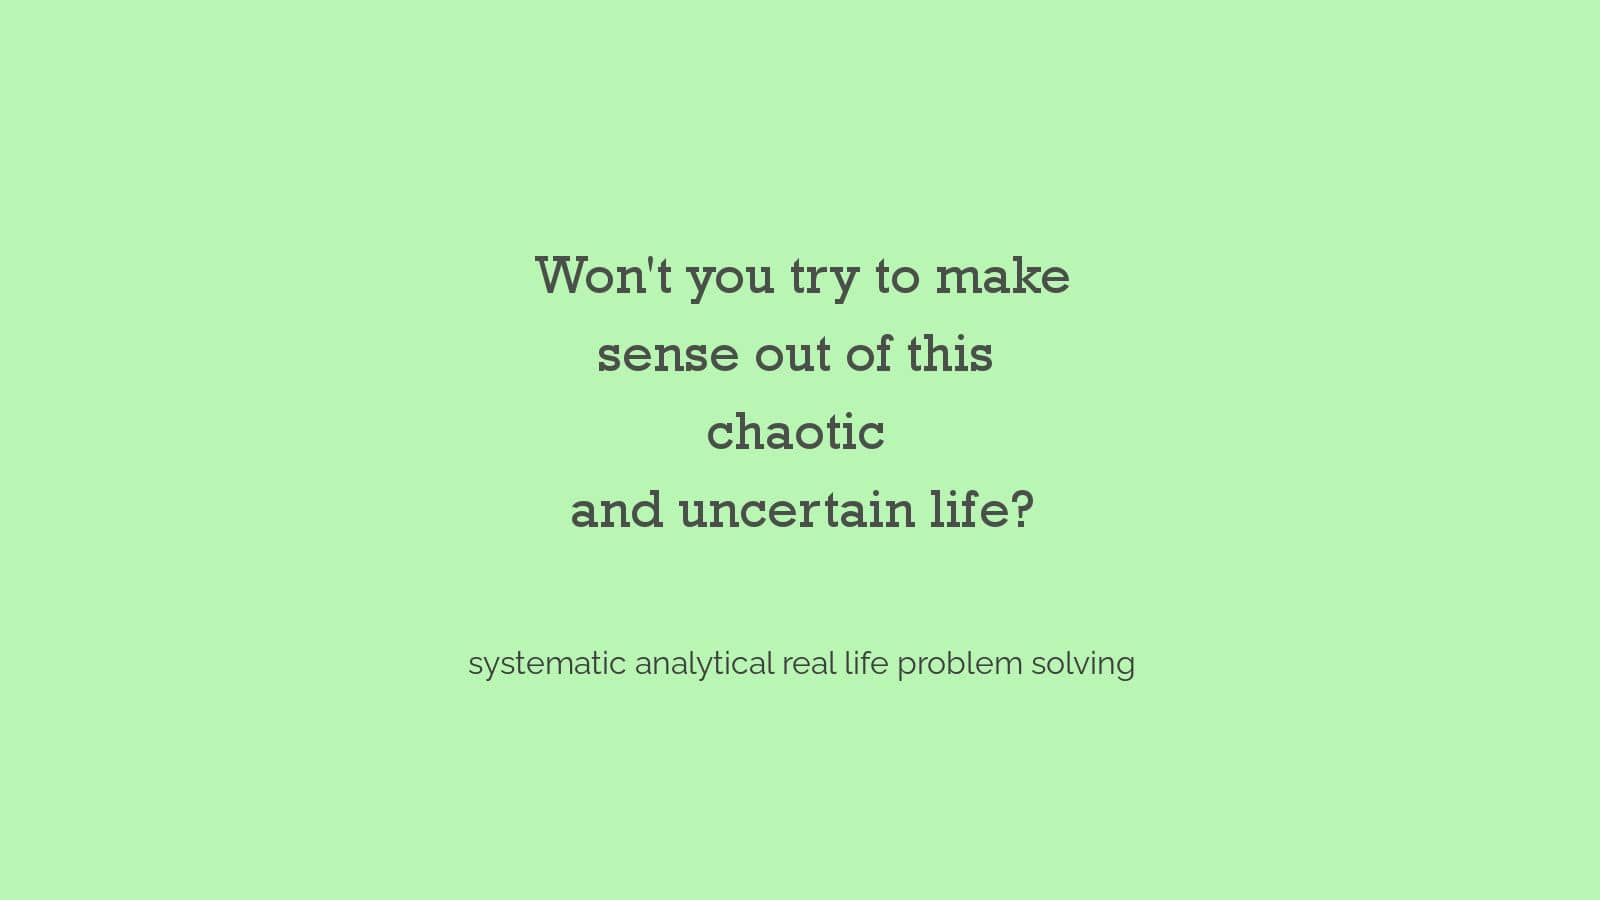 Systematic Analytical Approach to Solving a Real life Problem